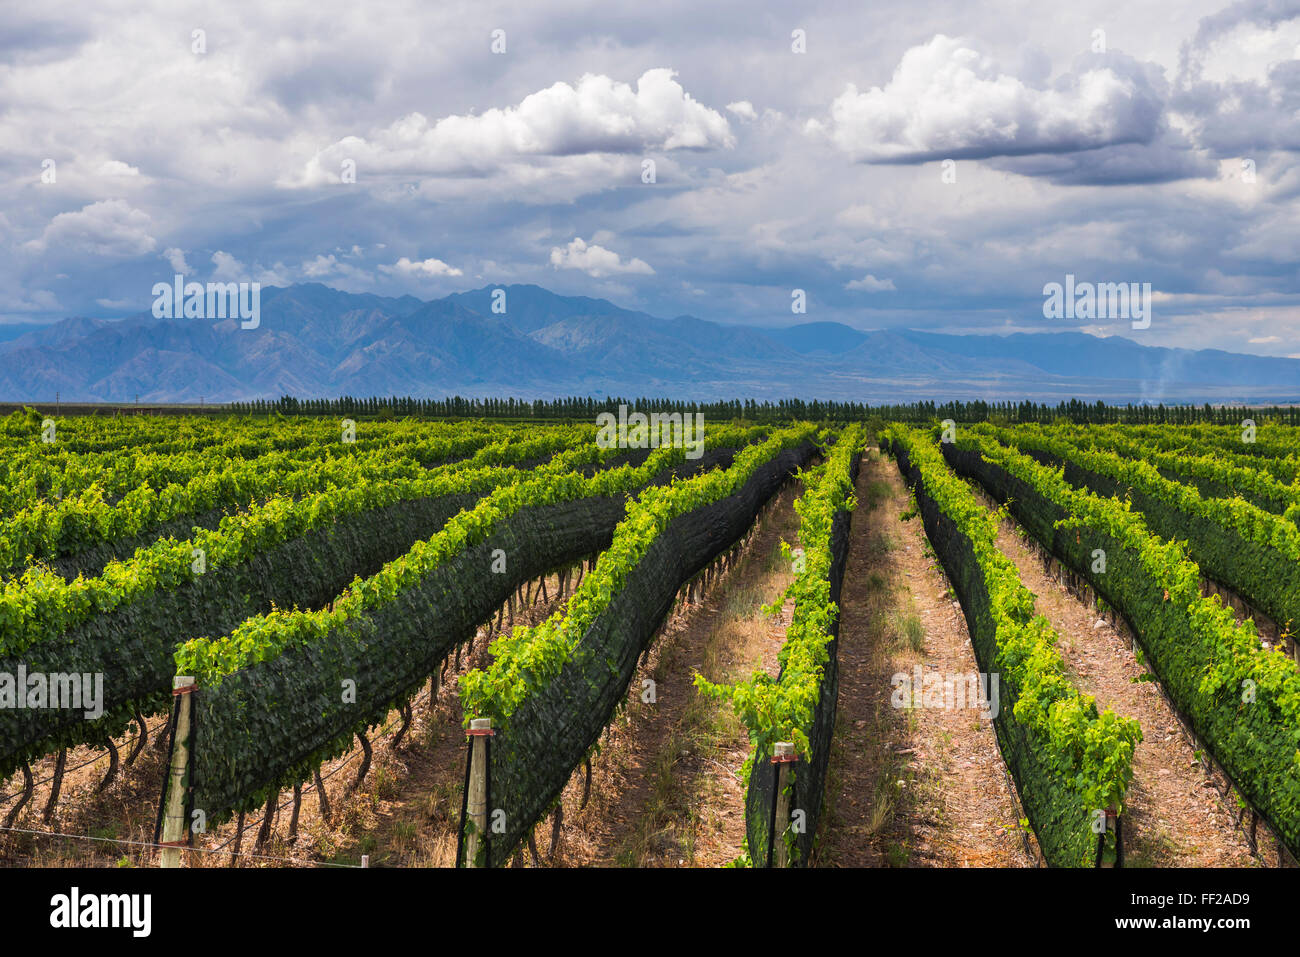 Vineyards in the Uco VaRMRMey (VaRMRMe de Uco), a wine region in Mendoza Province, Argentina, South America Stock Photo